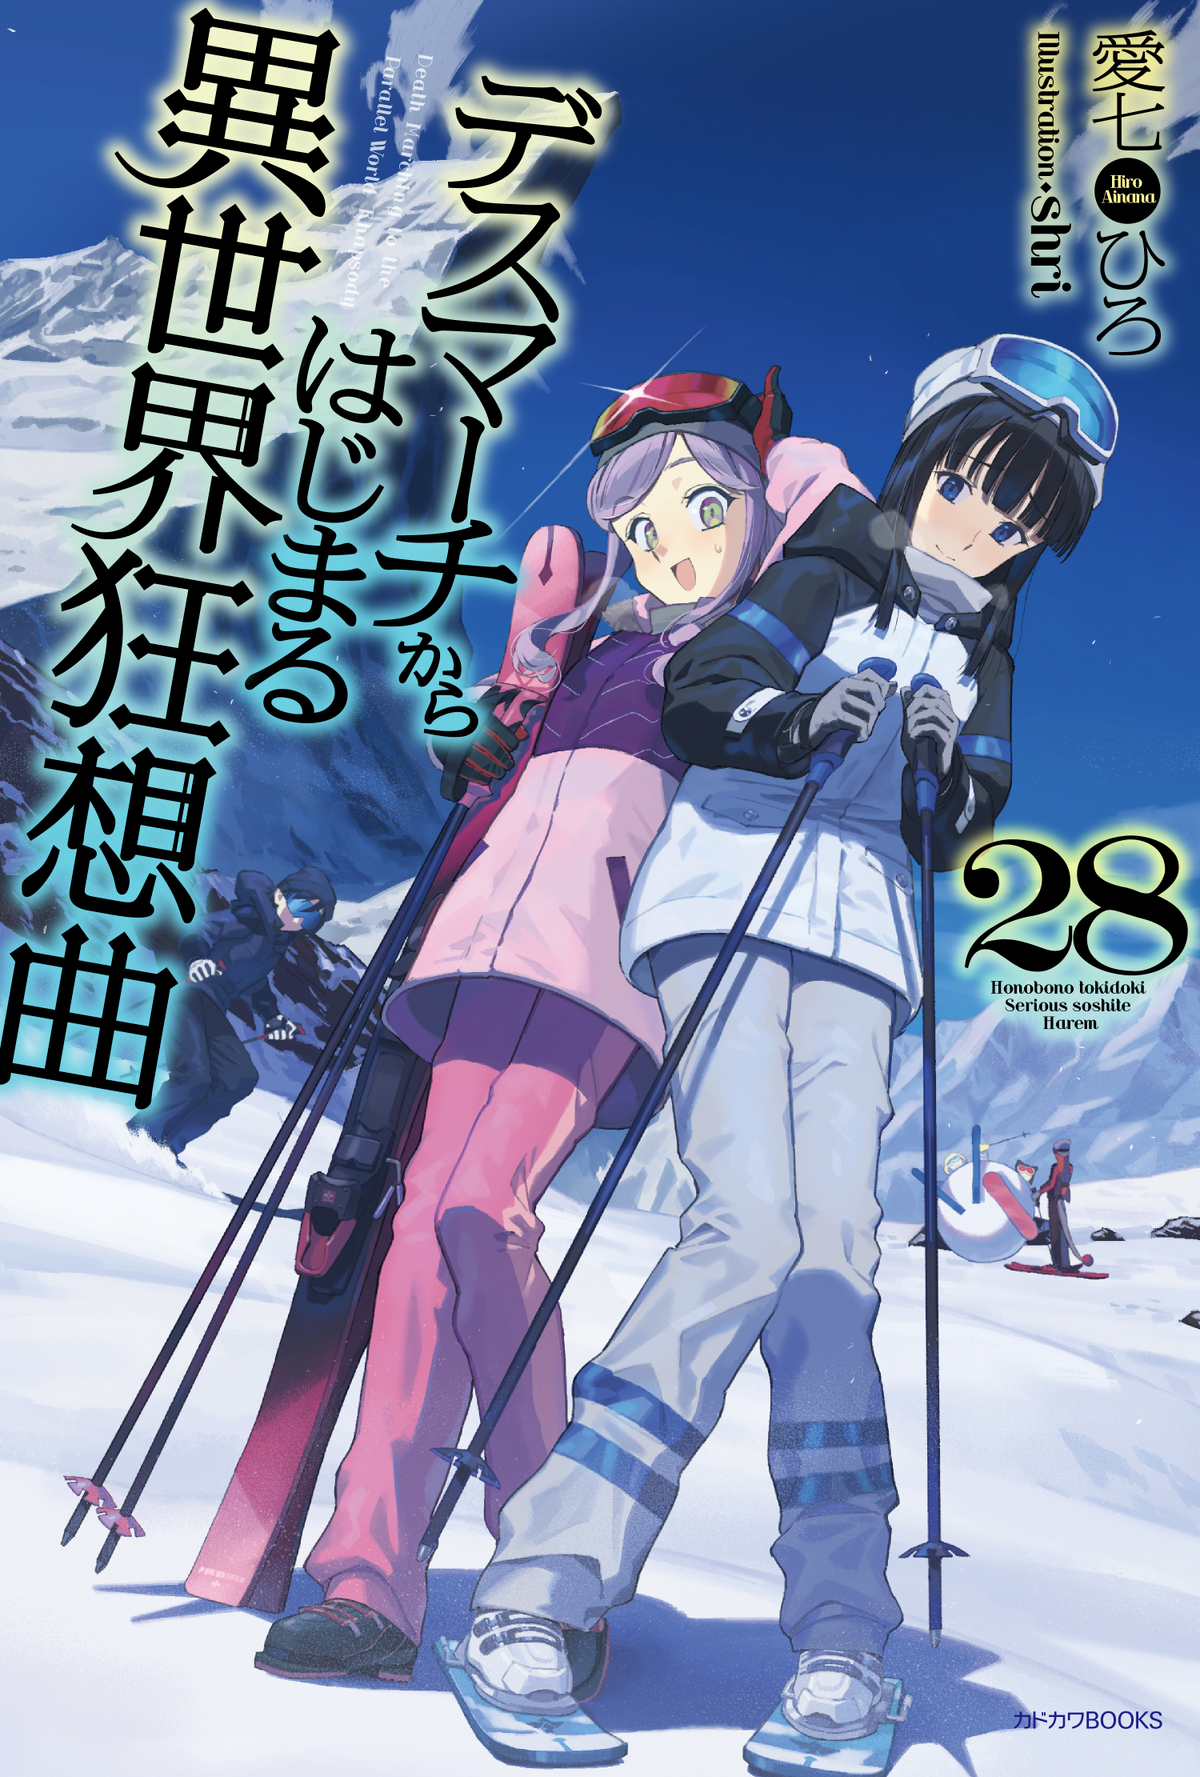 Light Novel Volume 20, Death March to the Parallel World Rhapsody Wiki